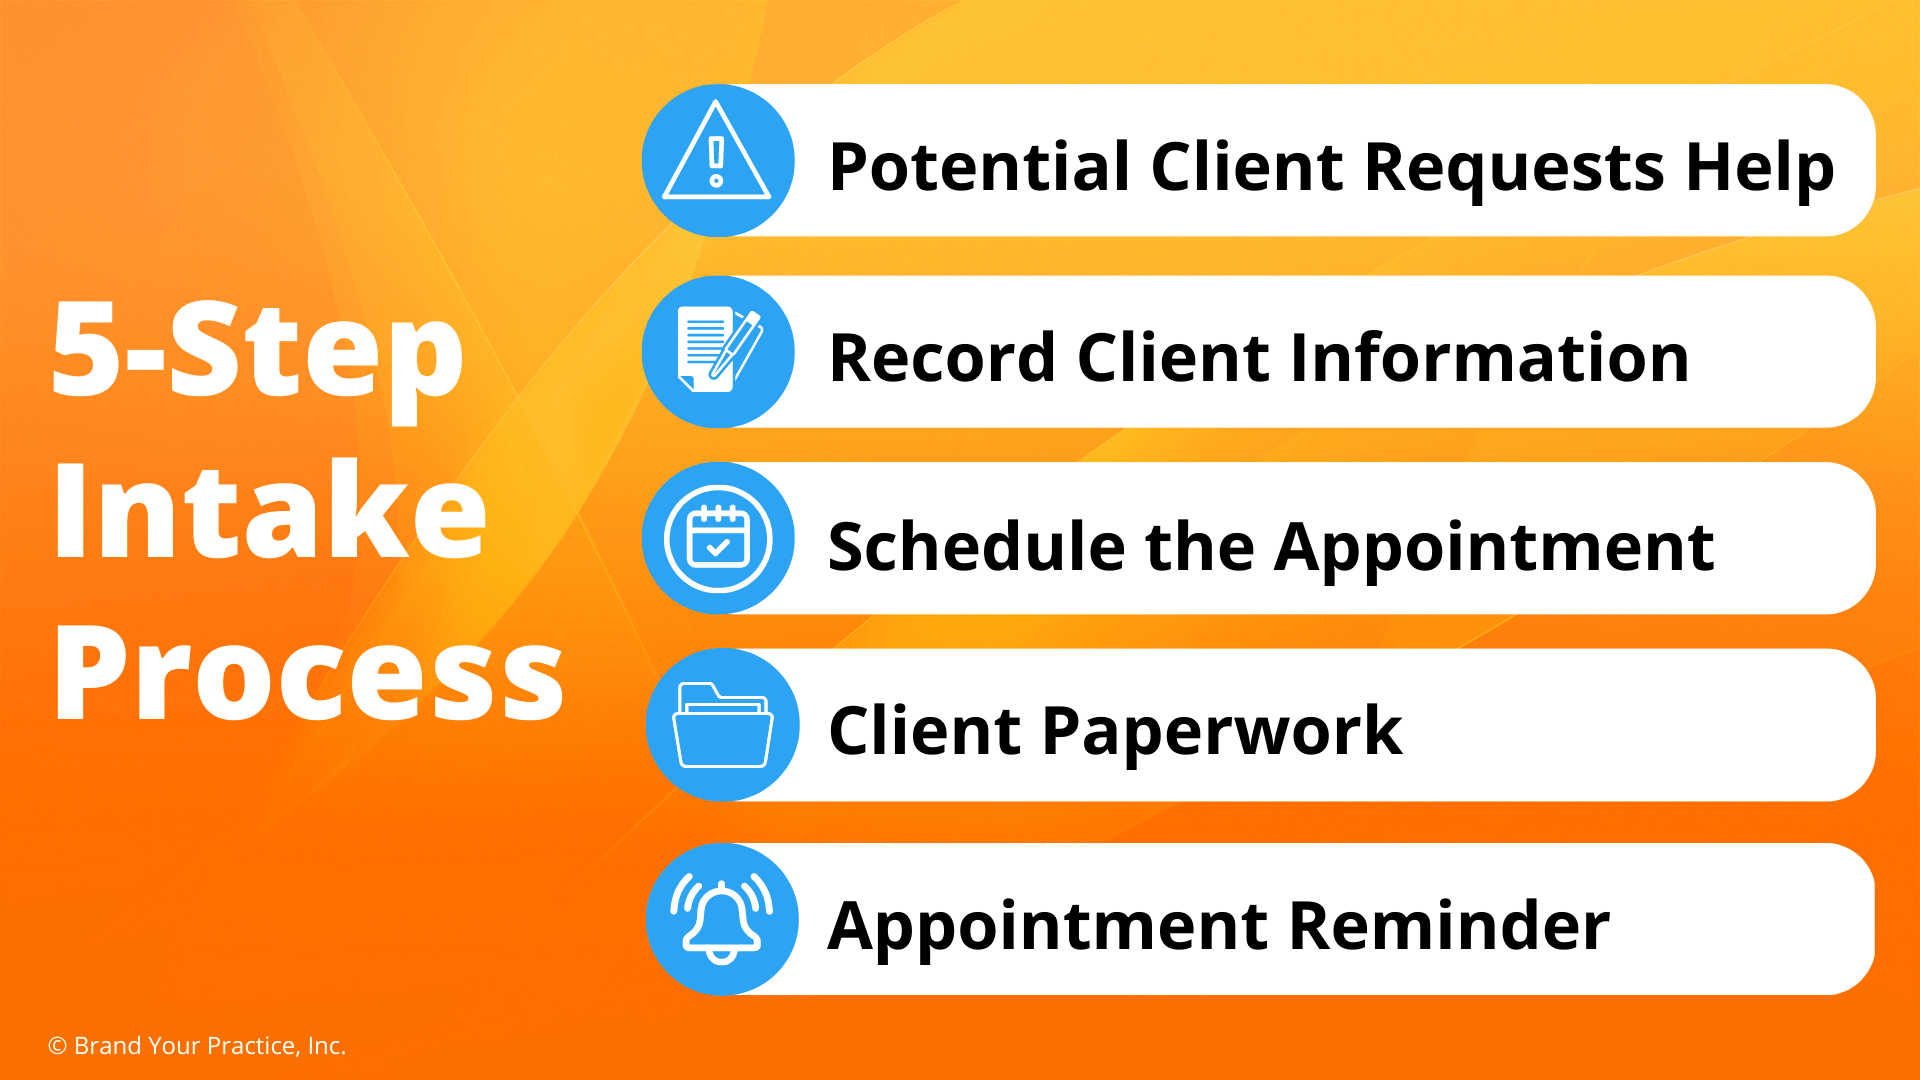 5-Step Intake Process:<br />
1. Potential Client Requests Help<br />
2. Record Client Information<br />
3. Schedule the Appointment<br />
4. Client Paperwork<br />
5. Appointment Reminder